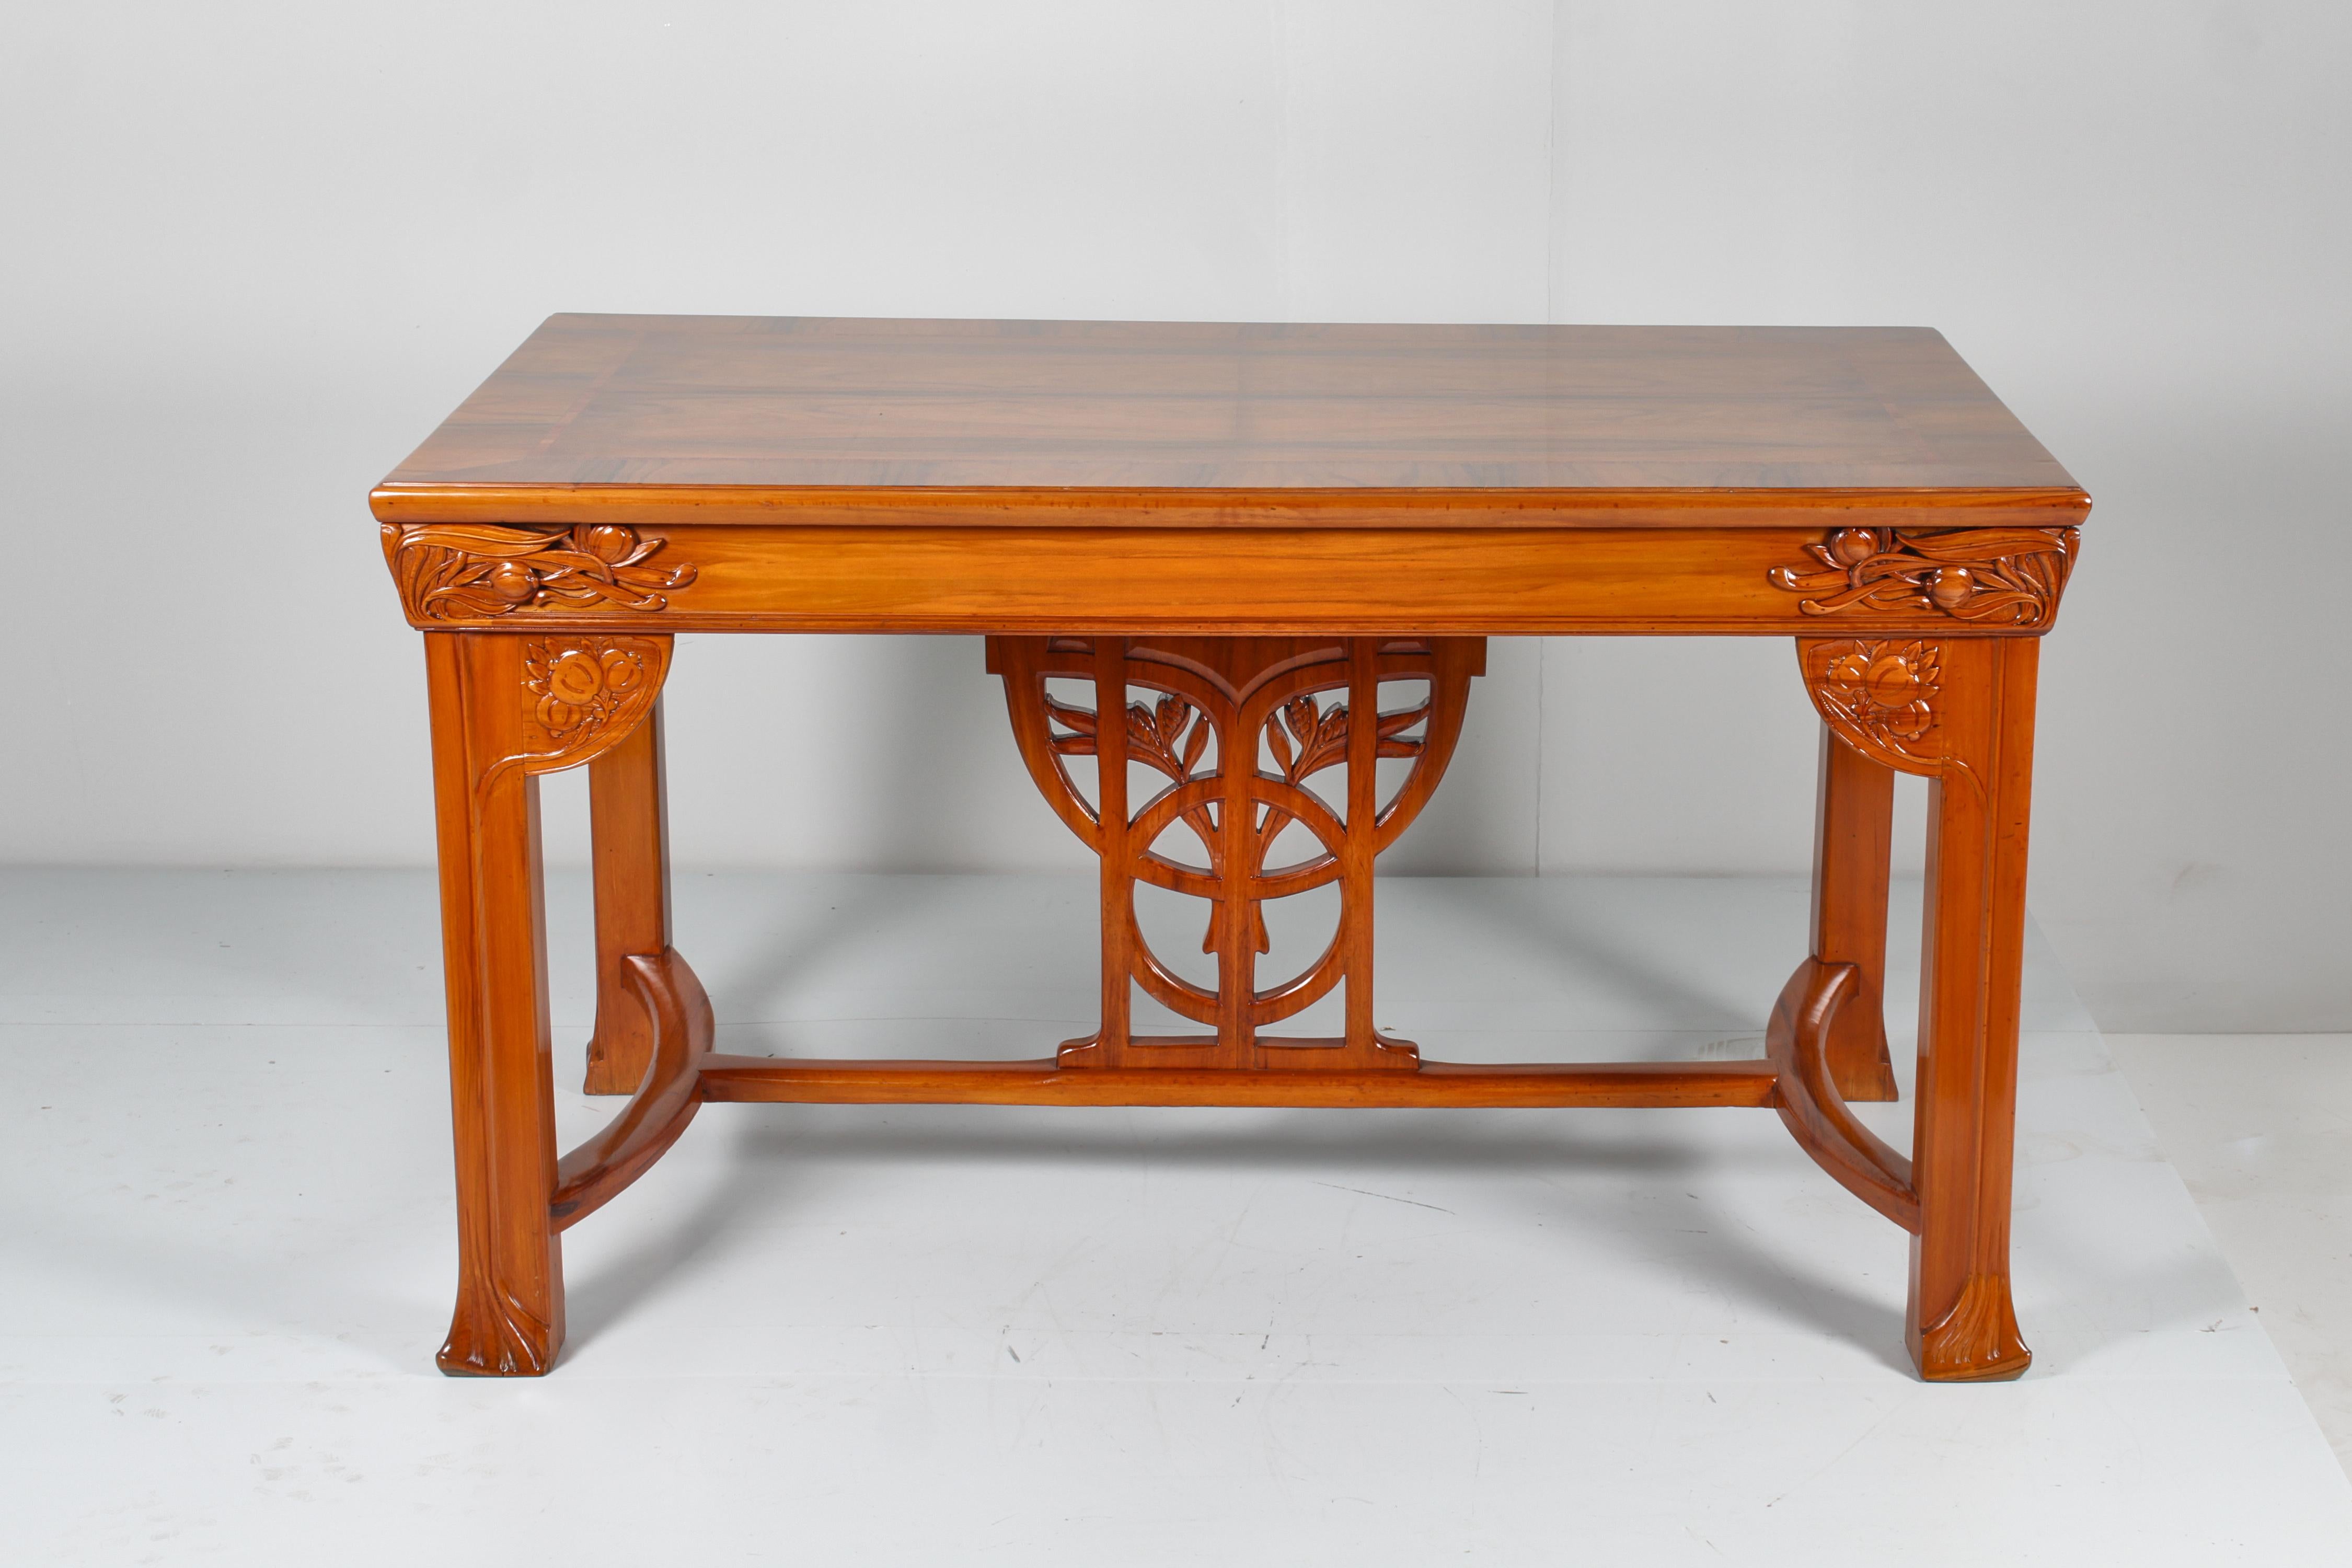 Art Nouveau V. Ducrot Restored Inlaid and Carved Wood Table 1900 Italy For Sale 1